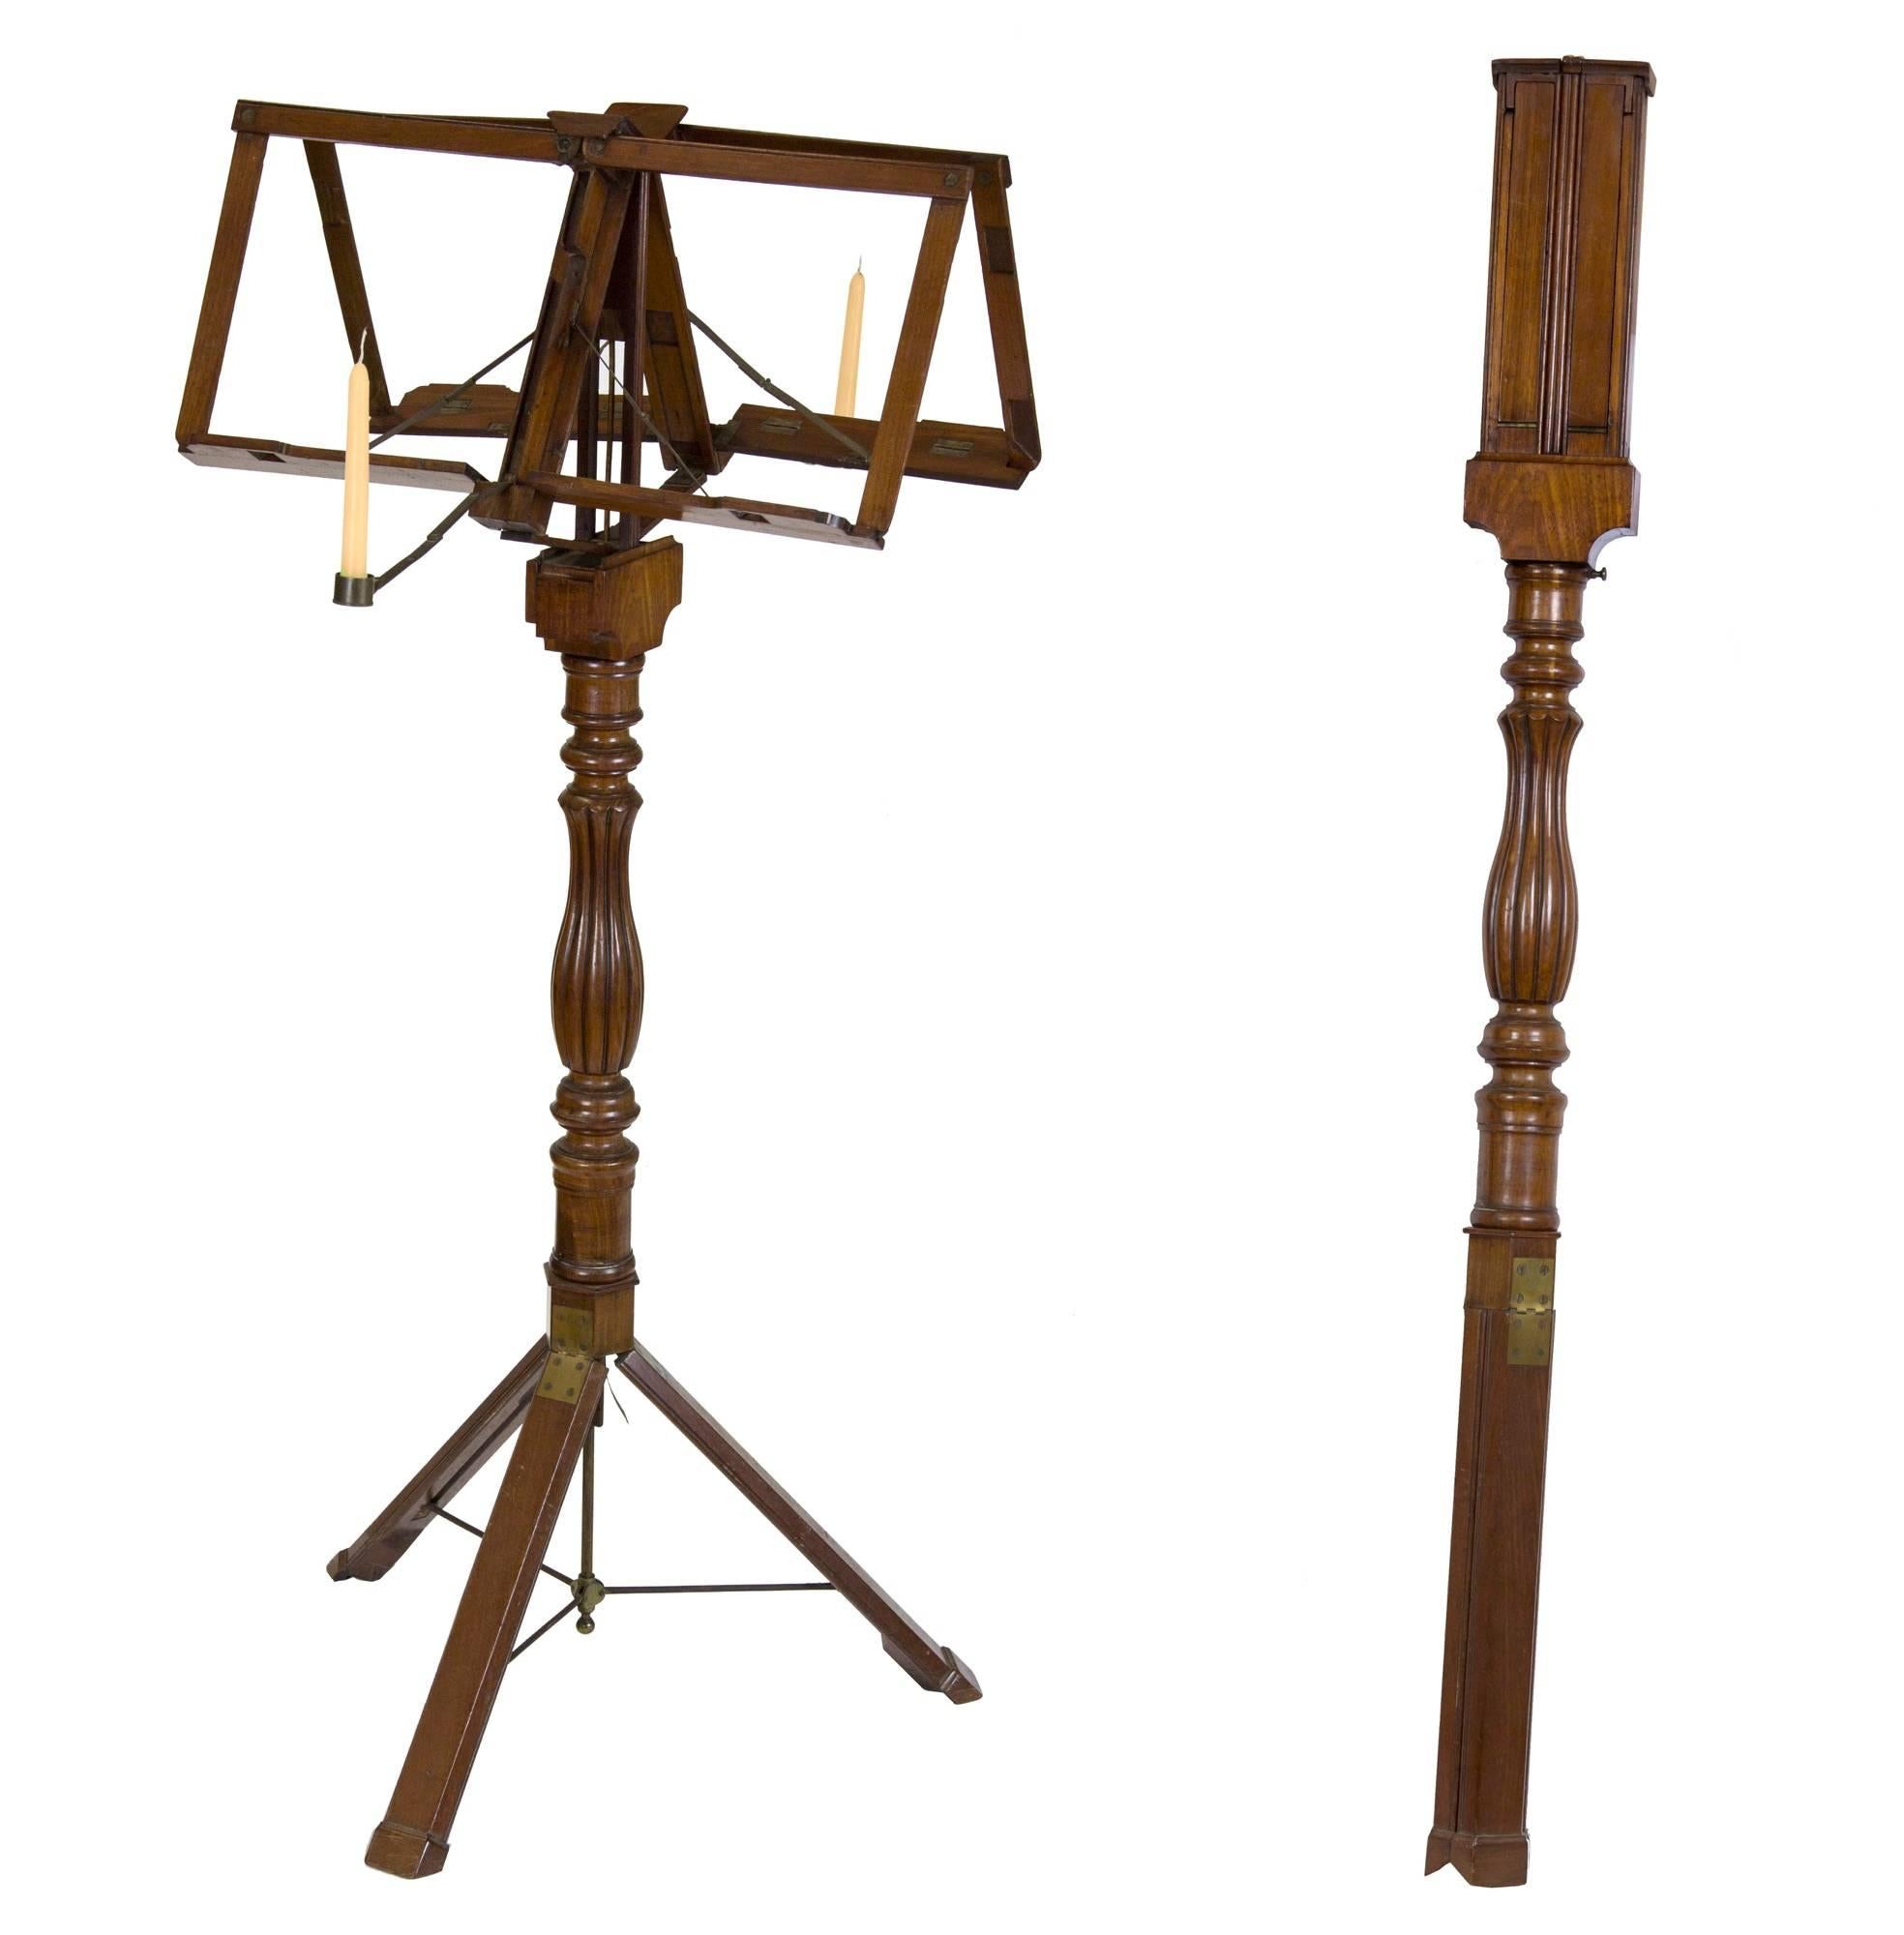 Rare Classical Mahogany Metamorphic Duet Musical Stand, Campaign Furniture For Sale